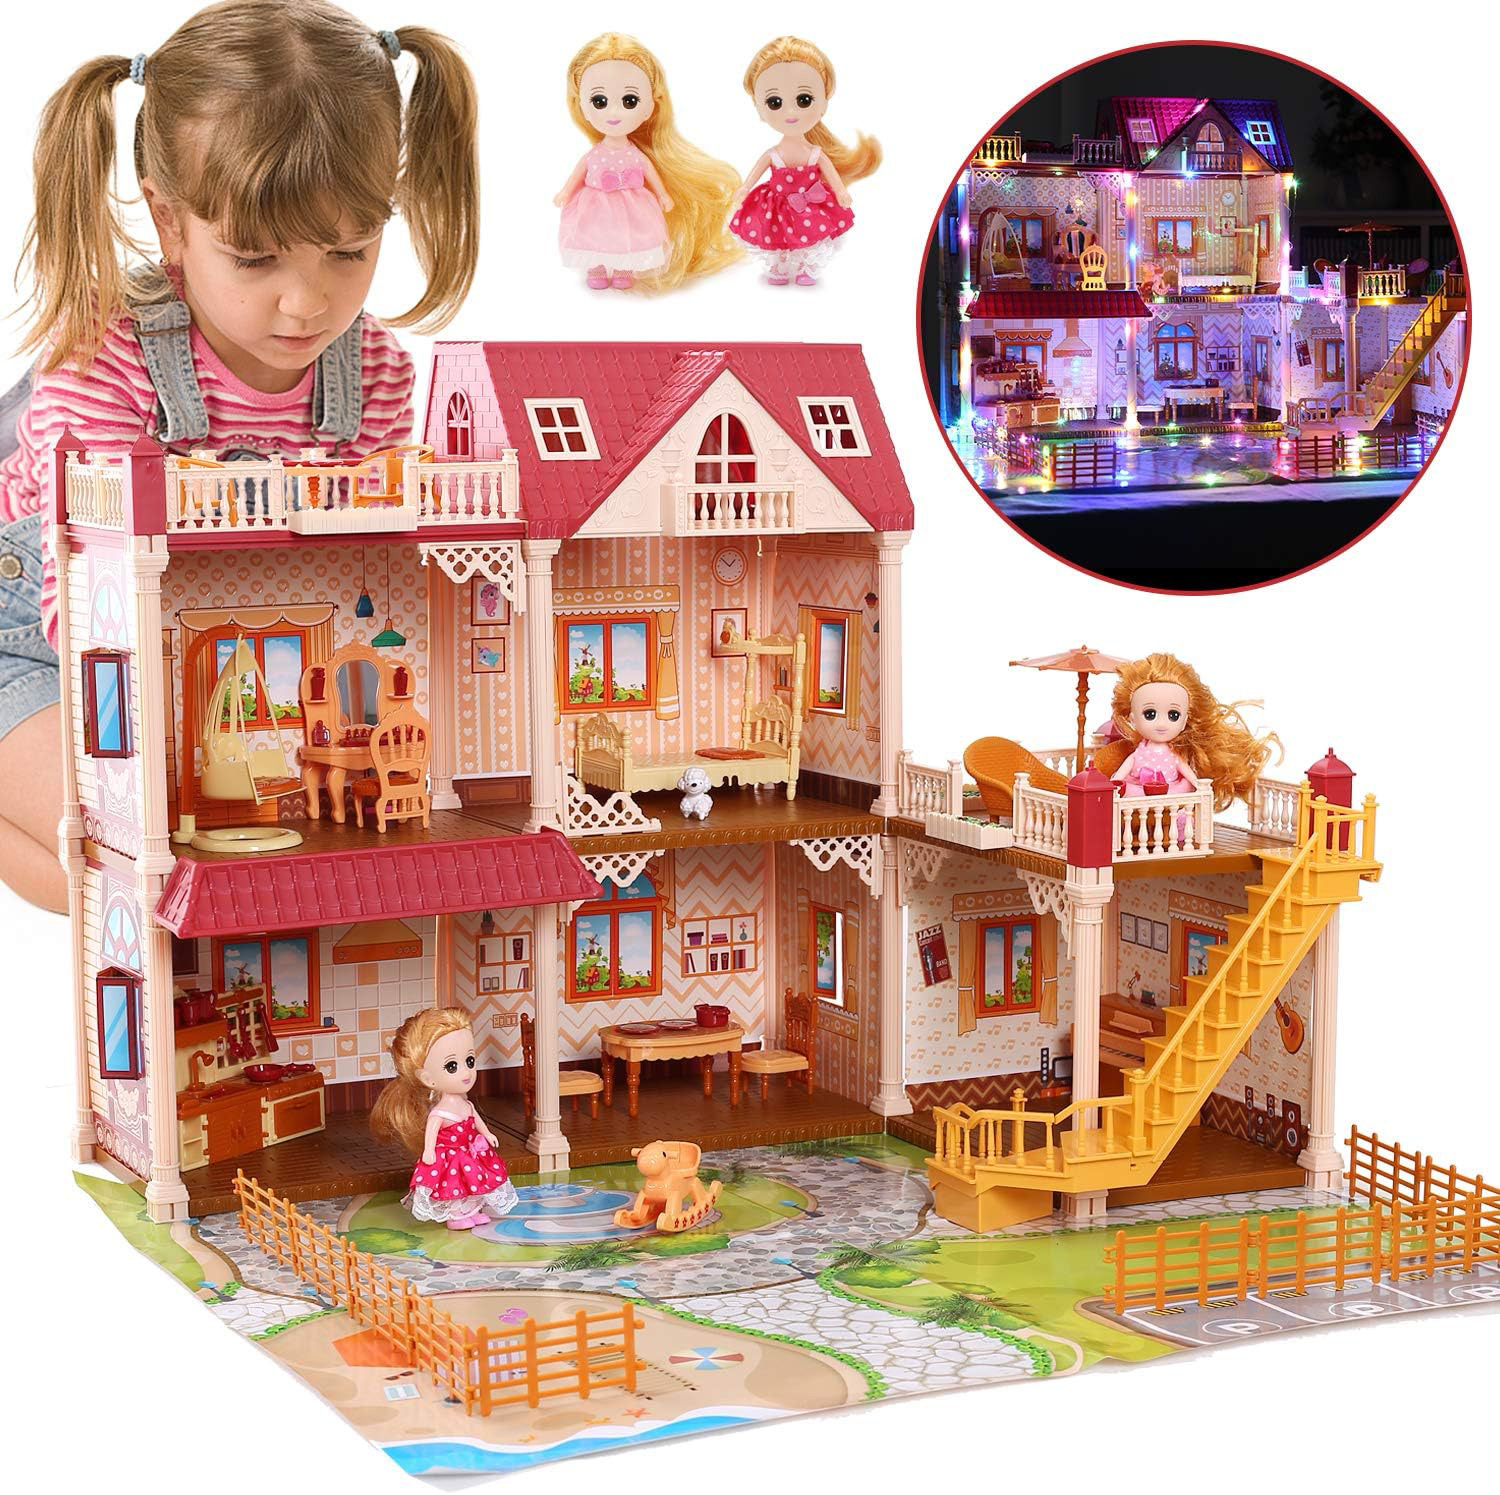 5 Rooms Huge Dollhouse with 2 Dolls and Colorful Light, 26 x 23 x 20 Doll House